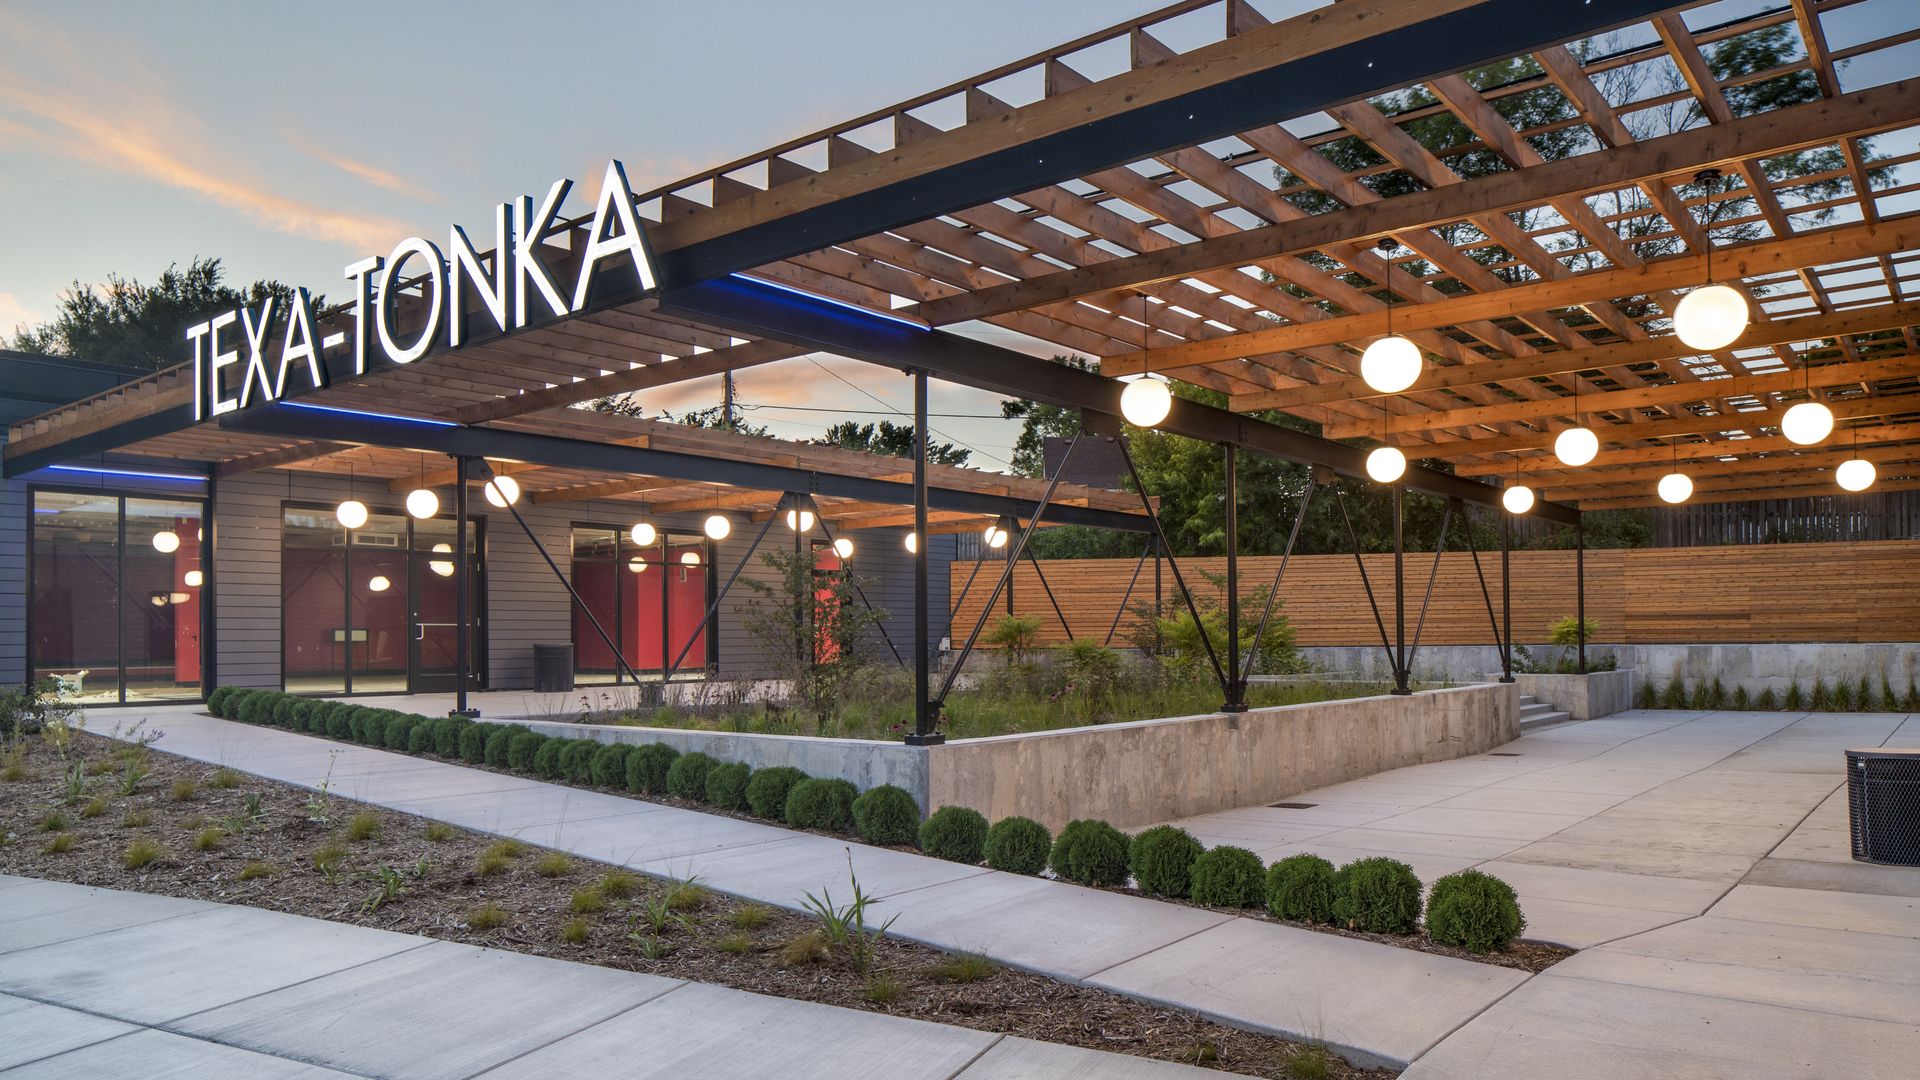 A glowing Texa Tonka sign above a new plaza with concrete and plantings 